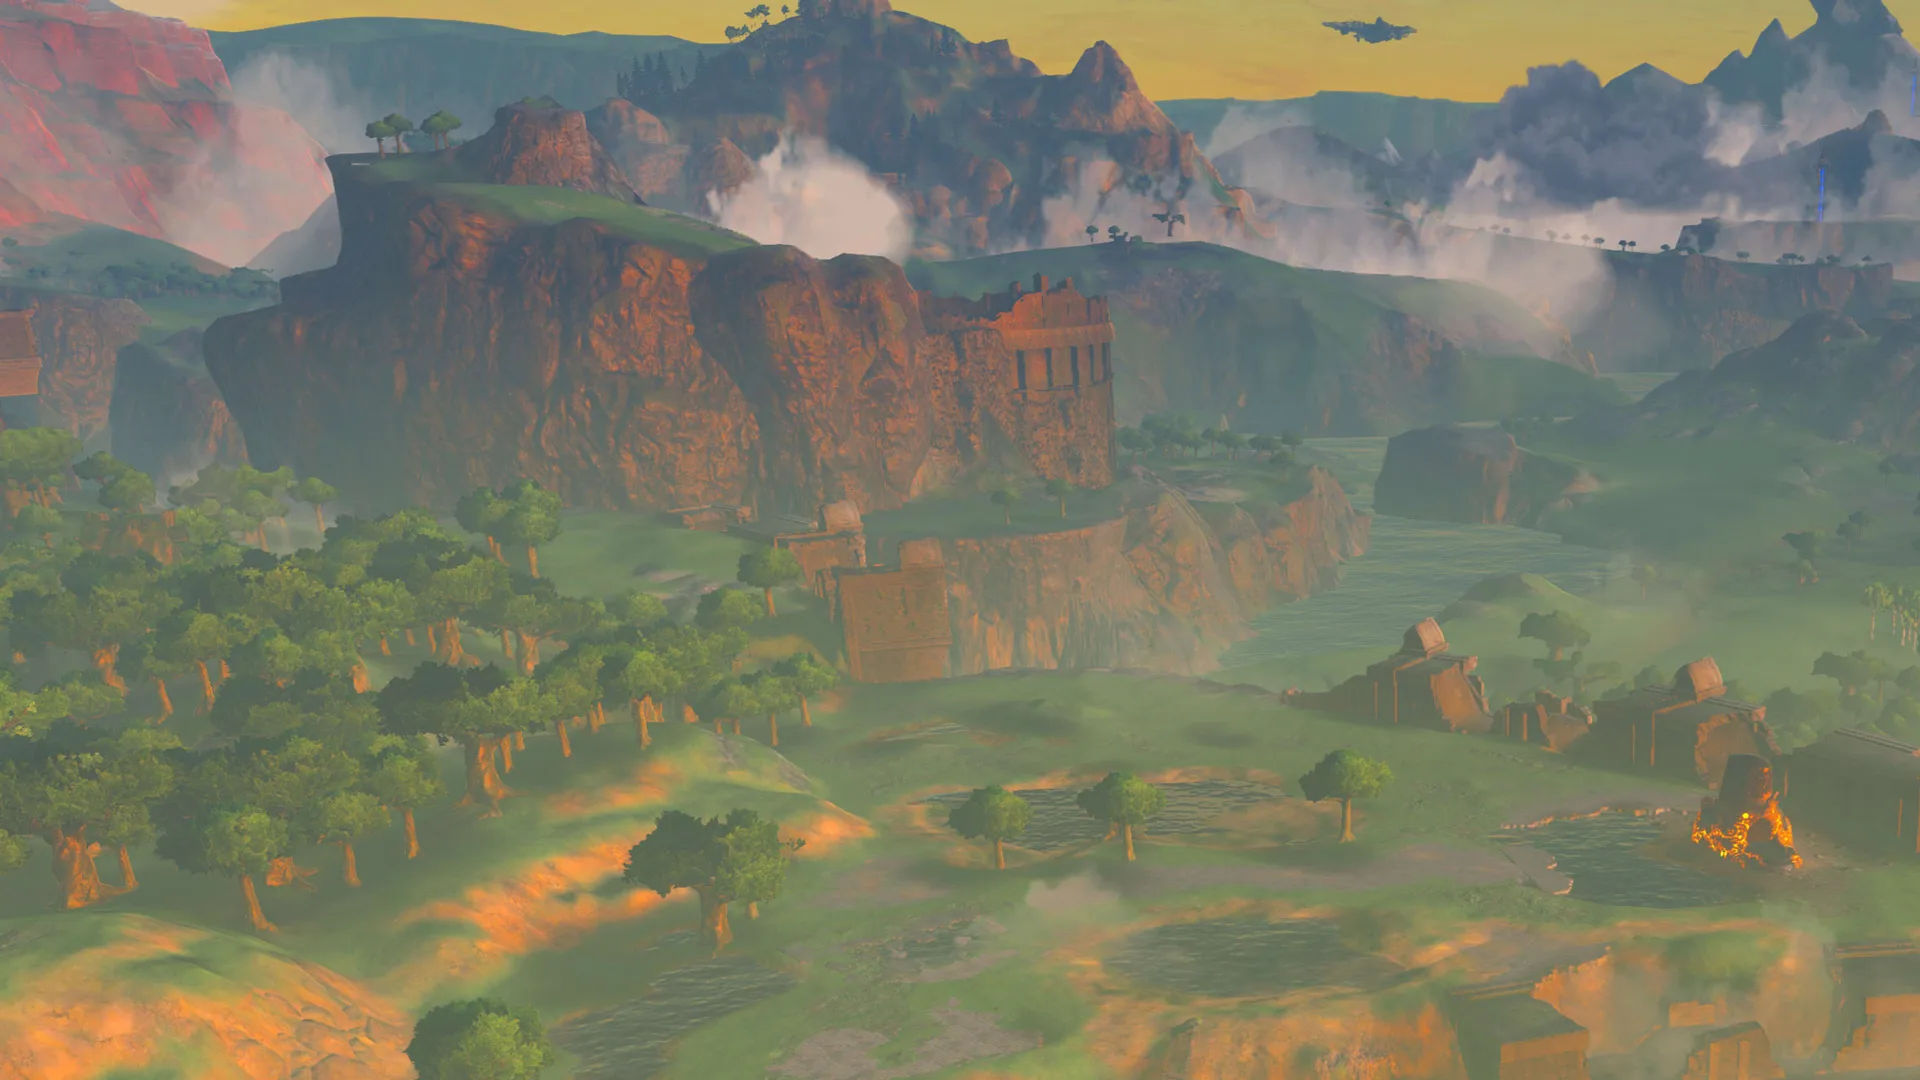 A scene from Zelda: Breath of the Wild showing a landscape at sunset with brown cliffs in the background.